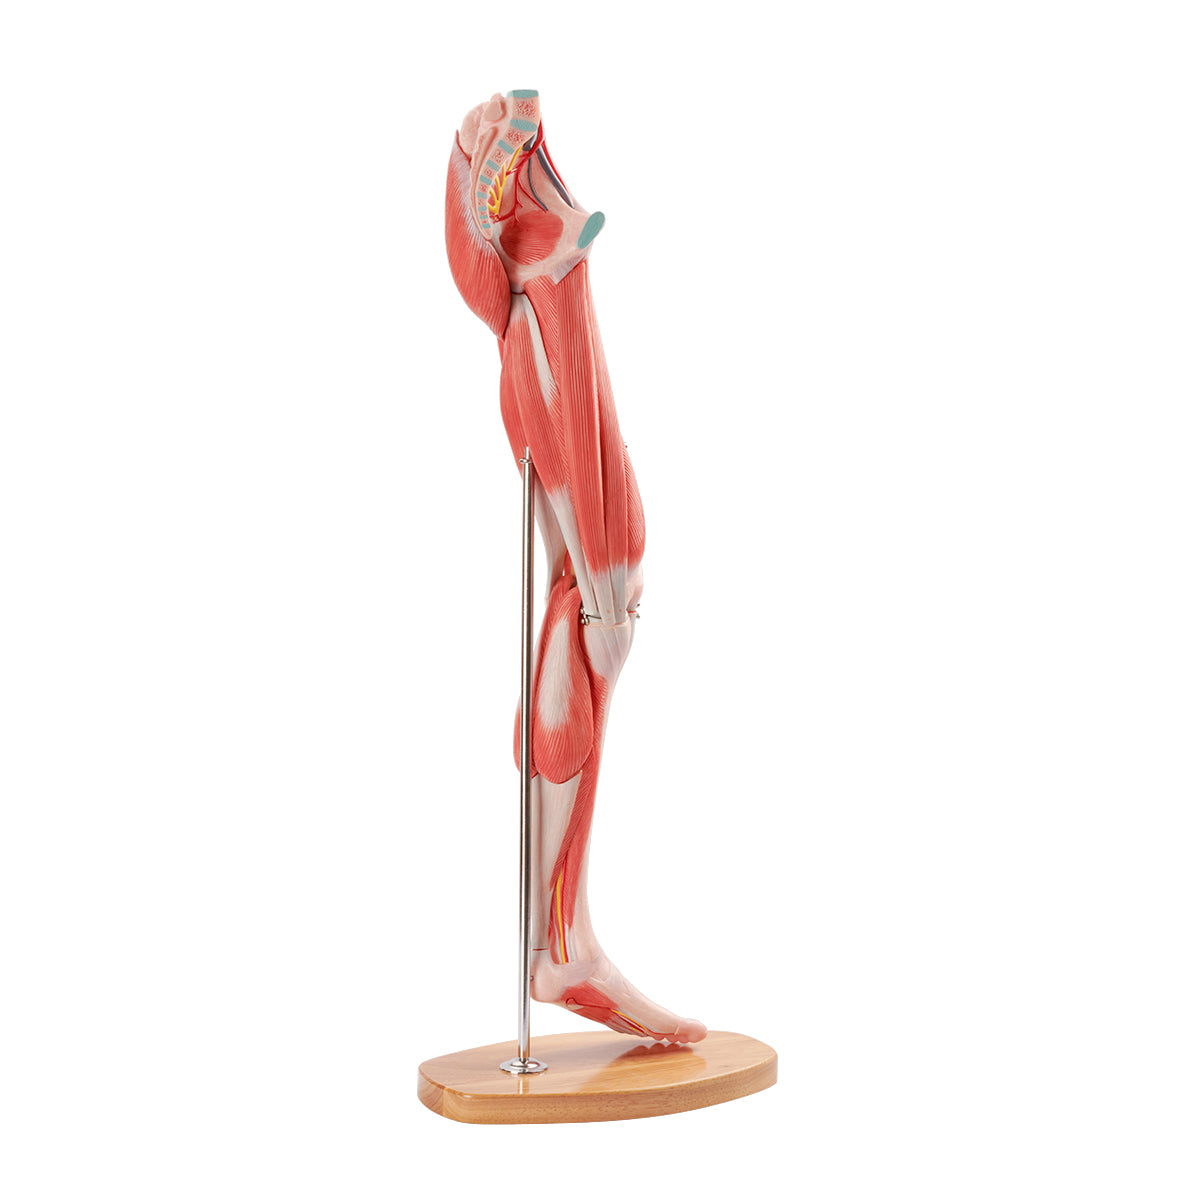 Evotech Scientific Muscle of the Human Leg, 2/3 Life Size, 14 Parts